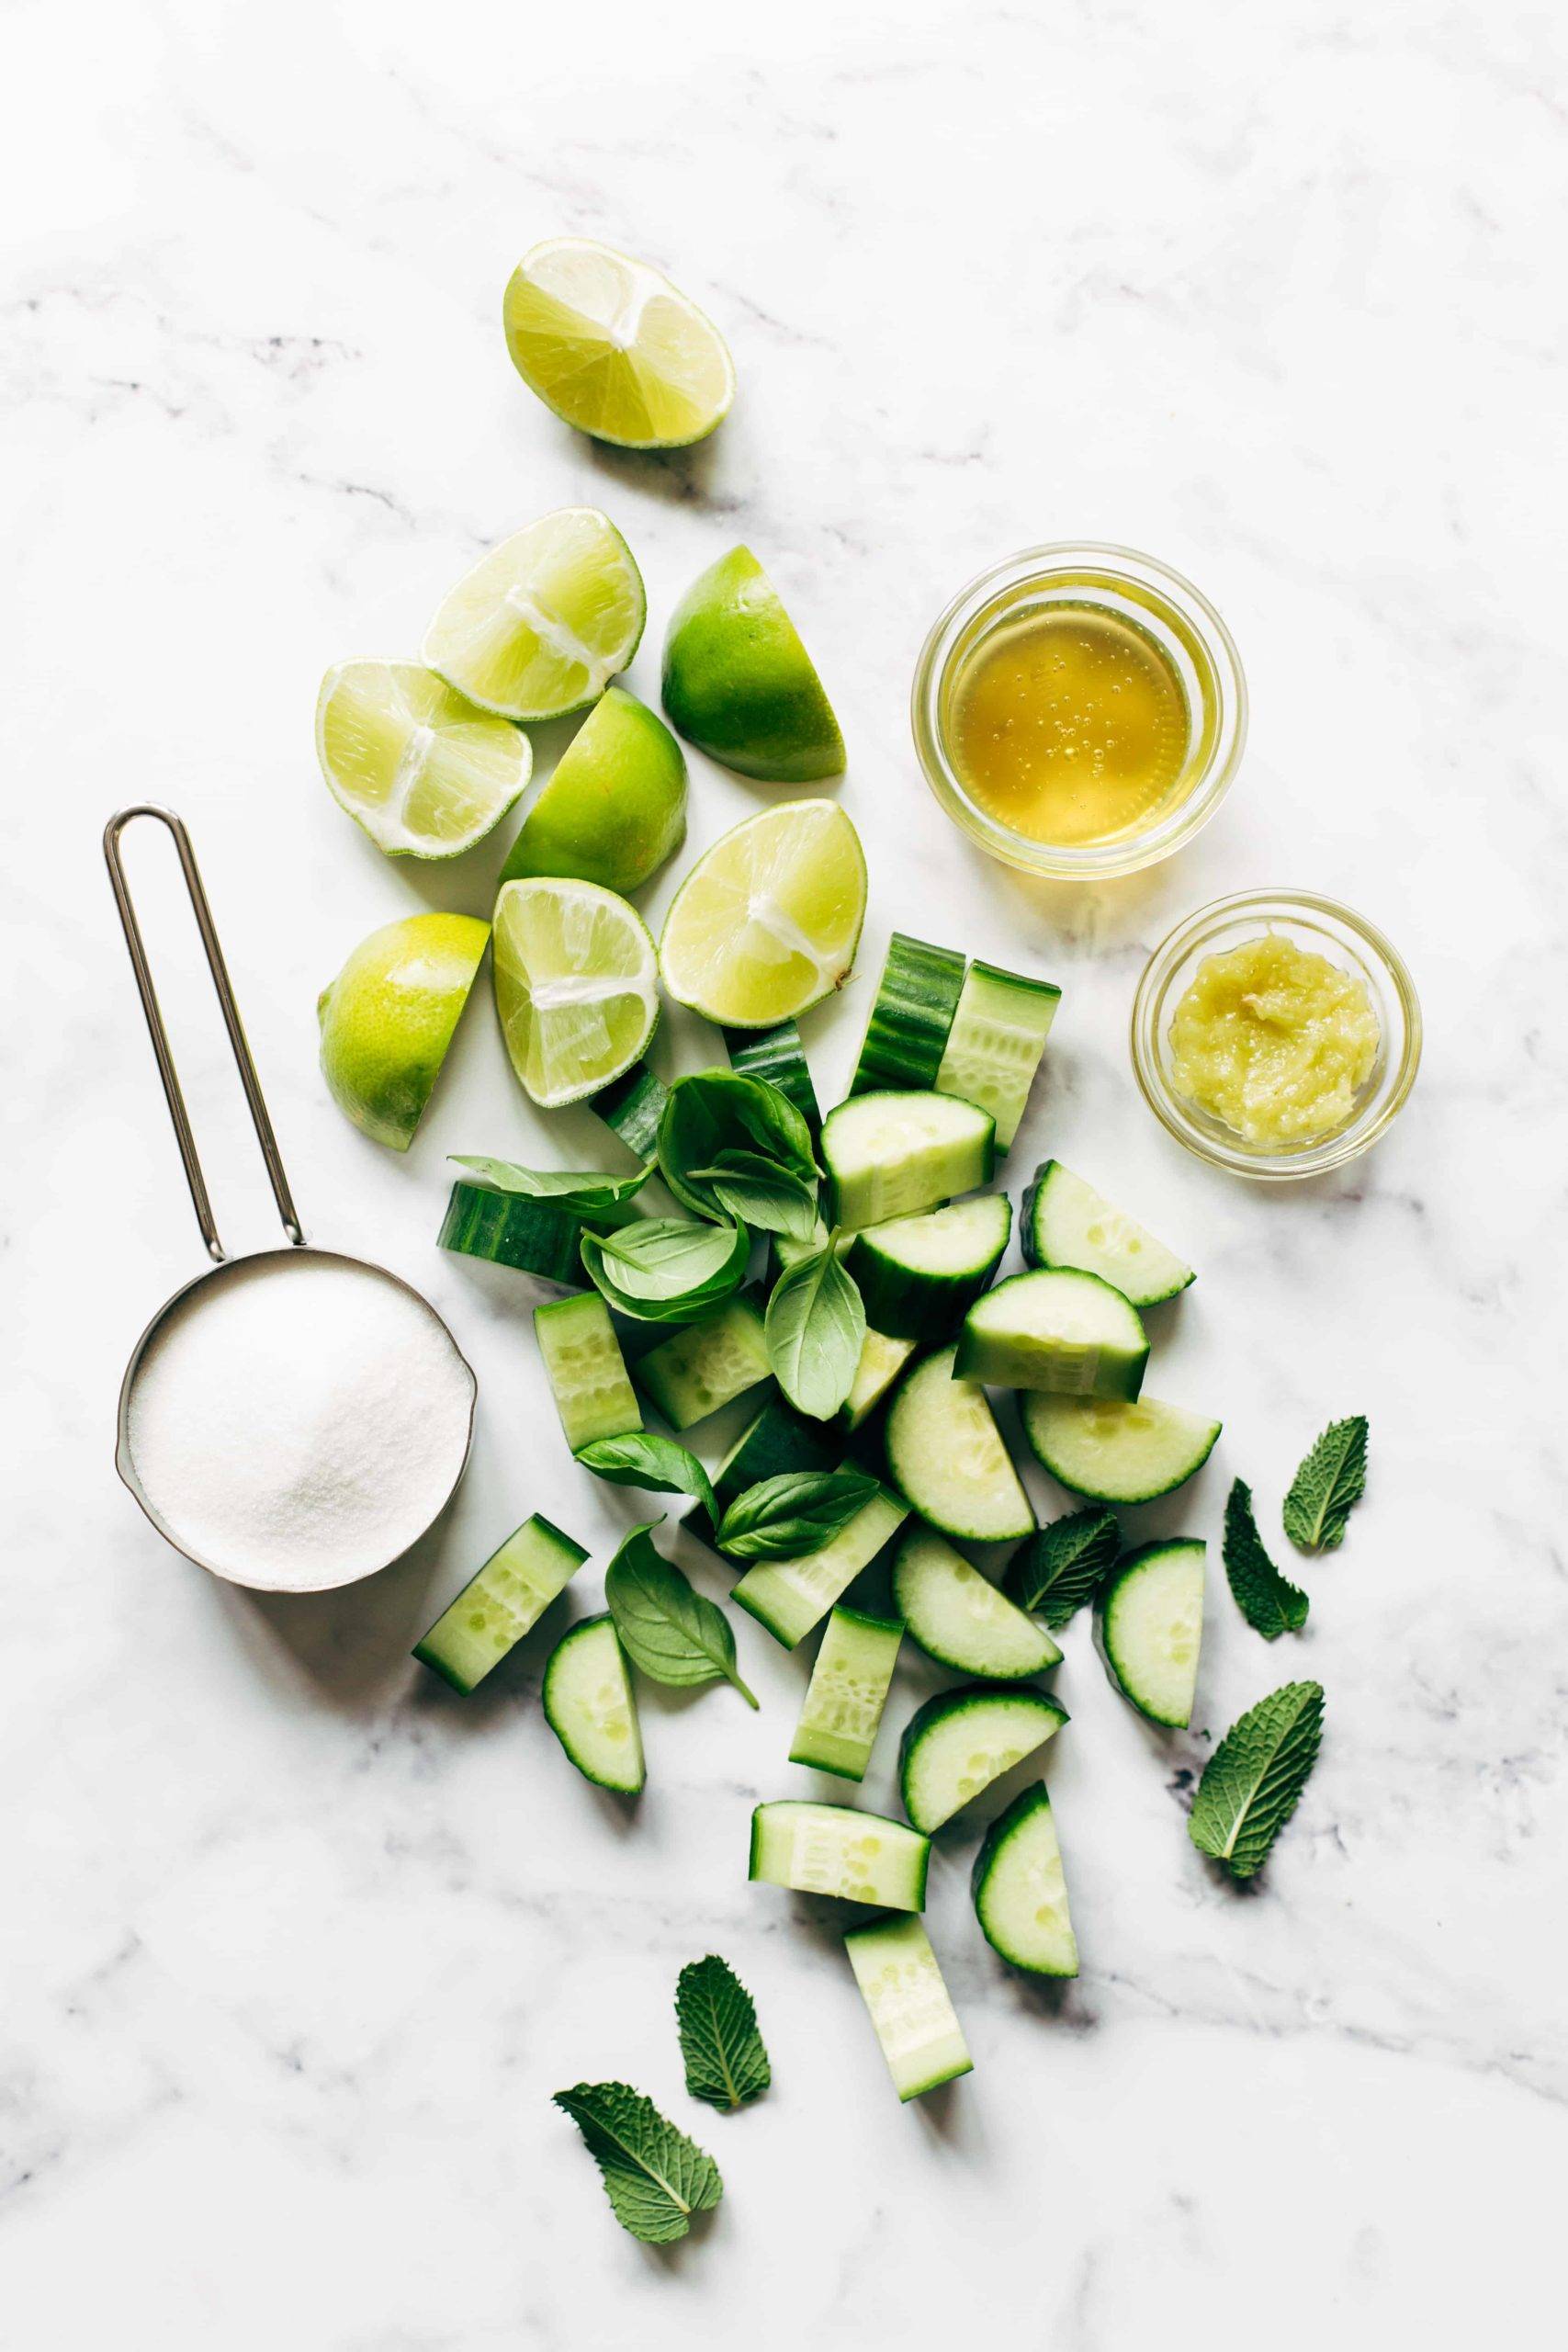 The ingredients for cucumber water include mint, chunks of cucumber, lime wedges, some sugar, some ginger, and some honey.